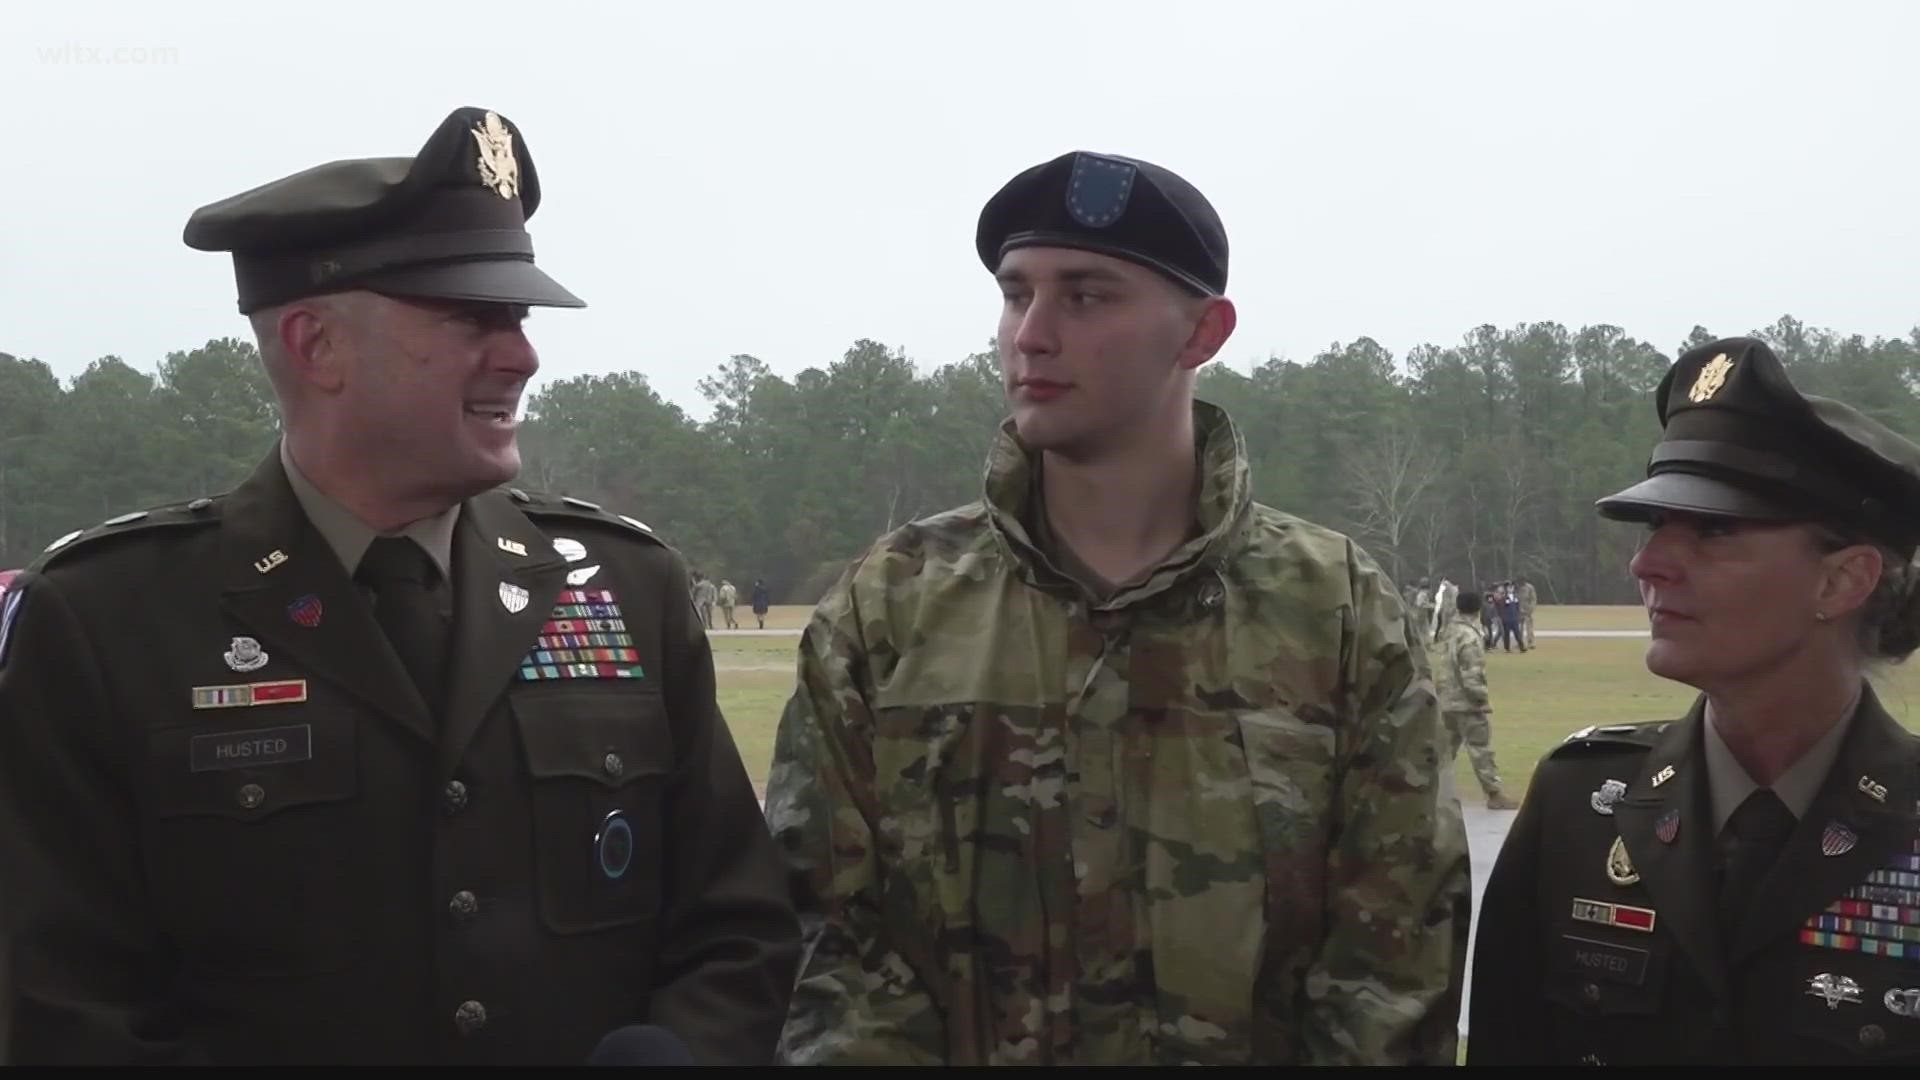 With Chantz Husted's graduation from Basic Training, for three generations of his family have now trained at Fort Jackson.